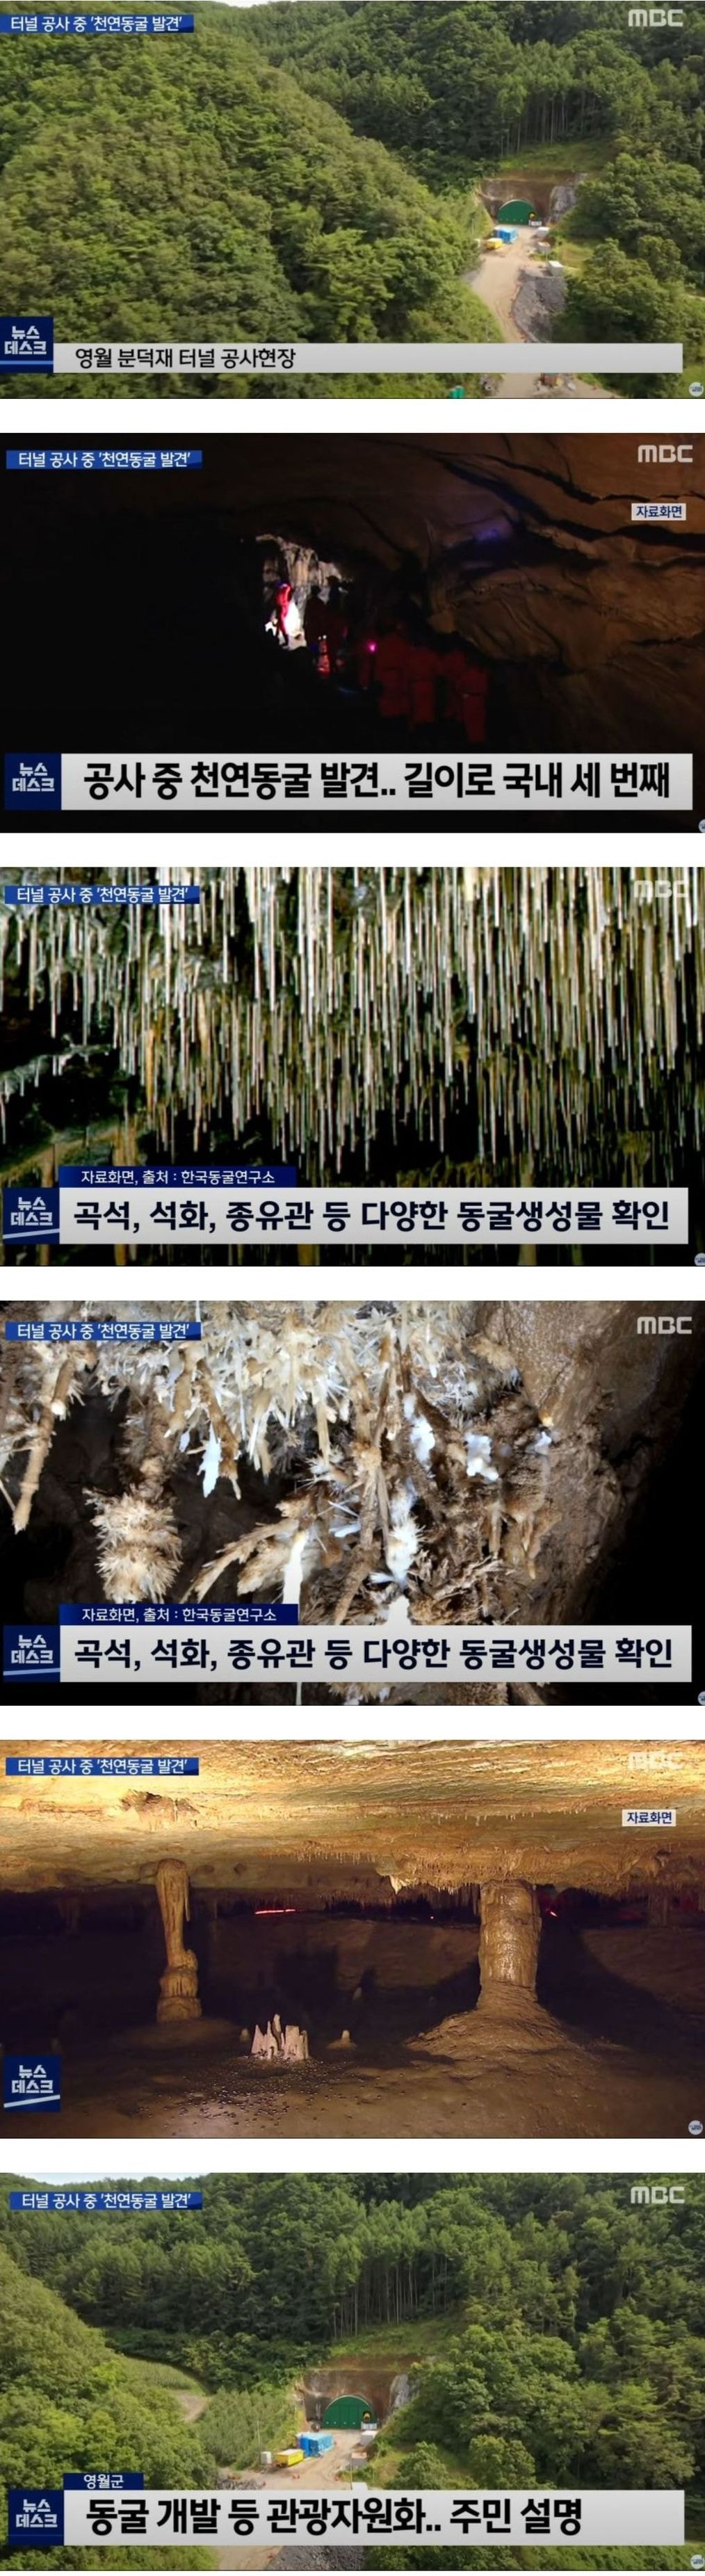 1,700m natural cave found during Yeongwol tunnel construction.news